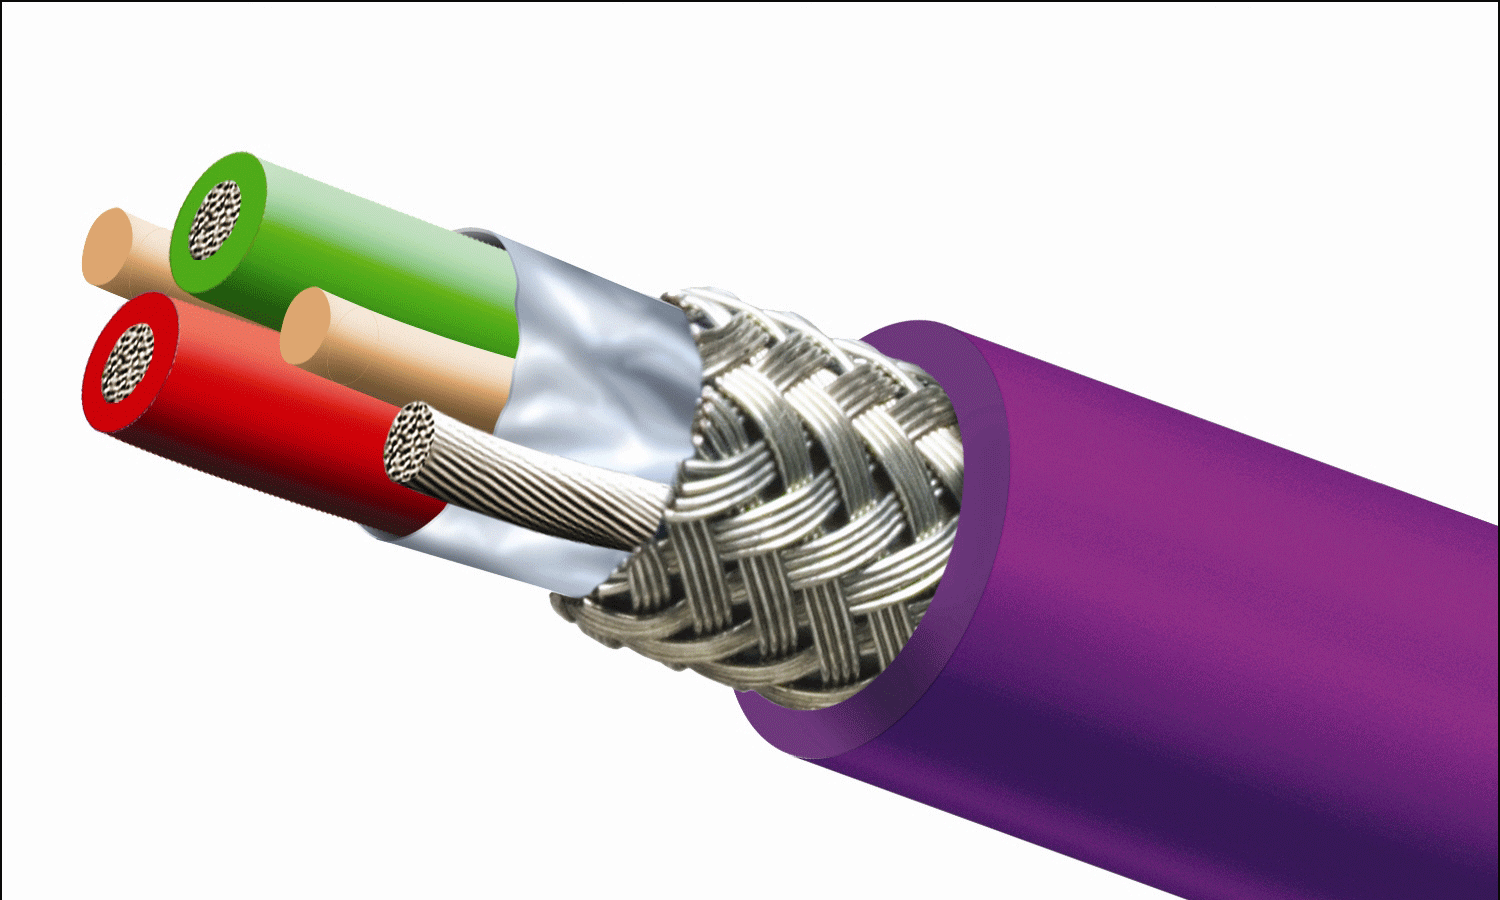 Profibus datacell field cable